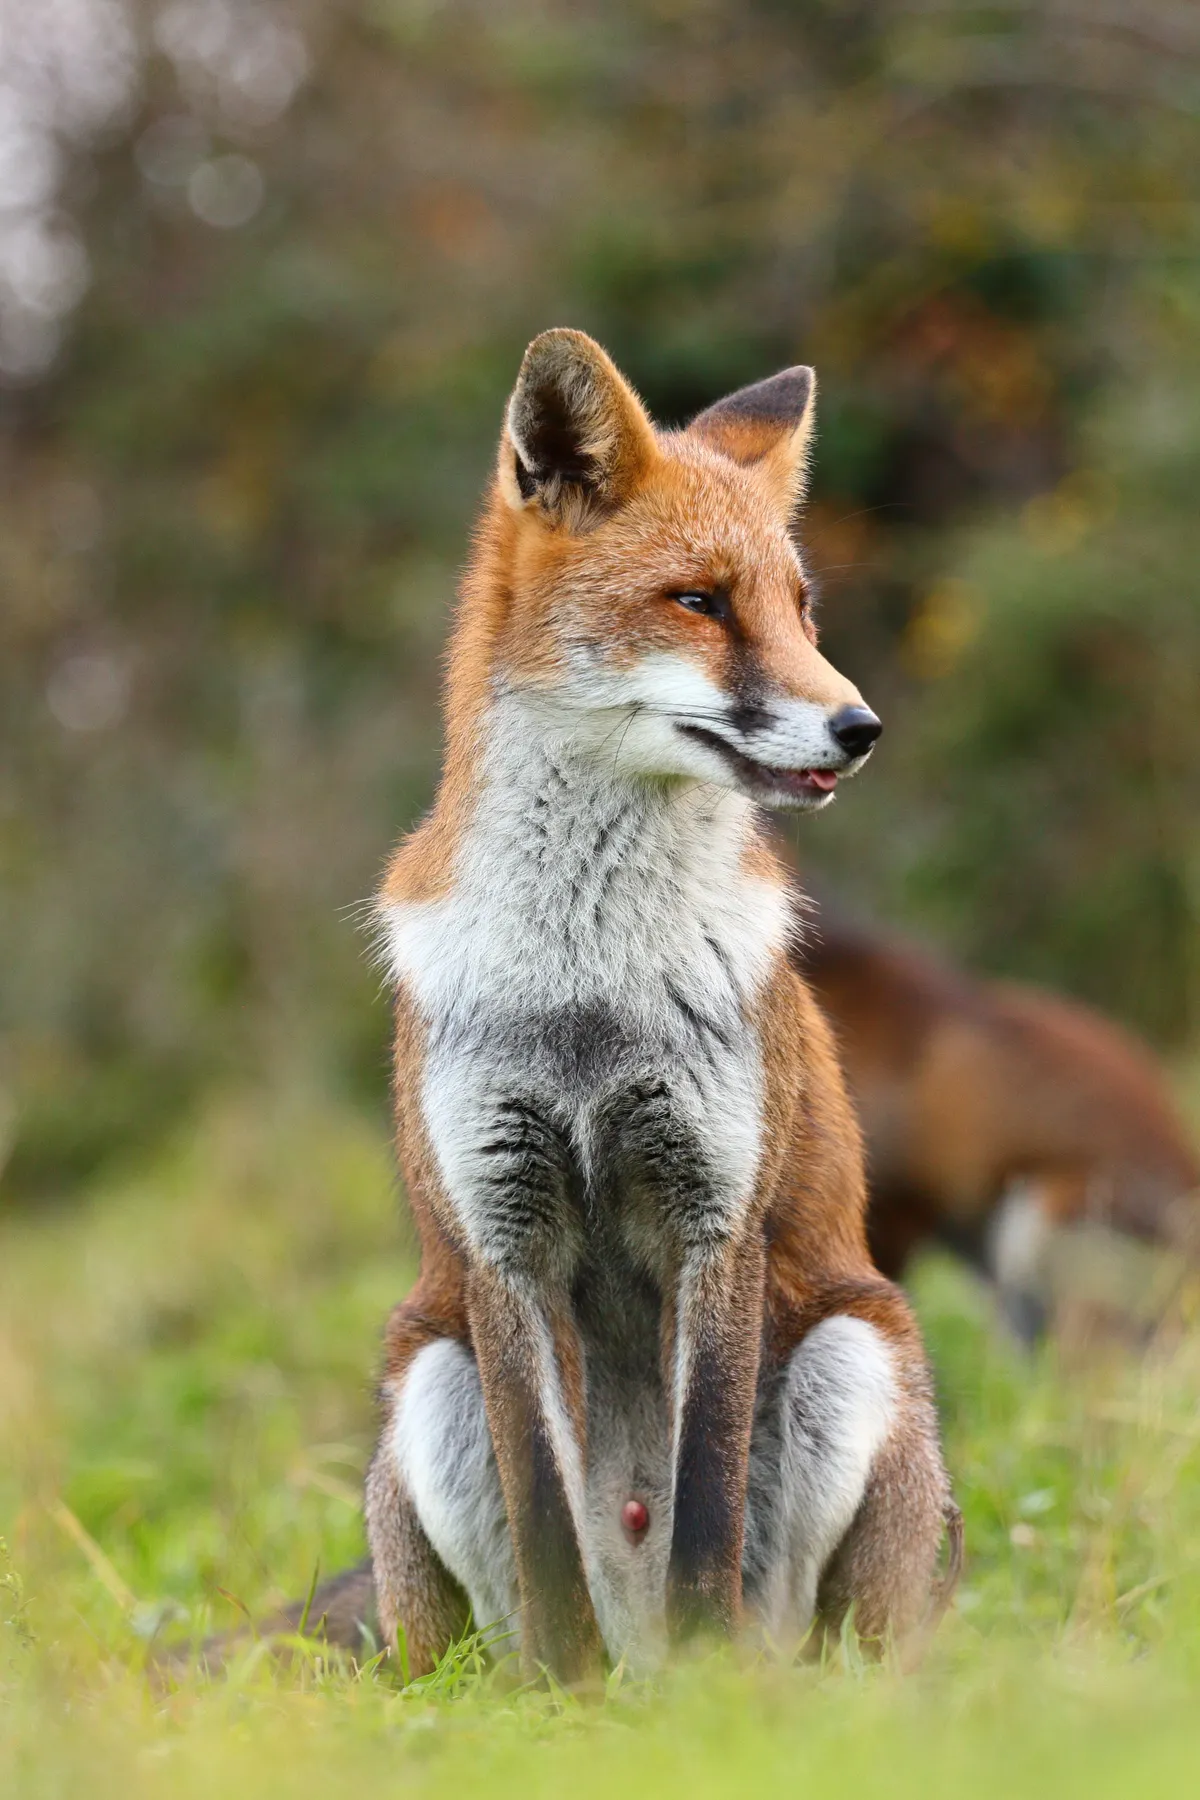 This is a local vixen I came to know as Rosie, she was very relaxed with me taking her portrait and was always a humbling experience. © Samuel Horne